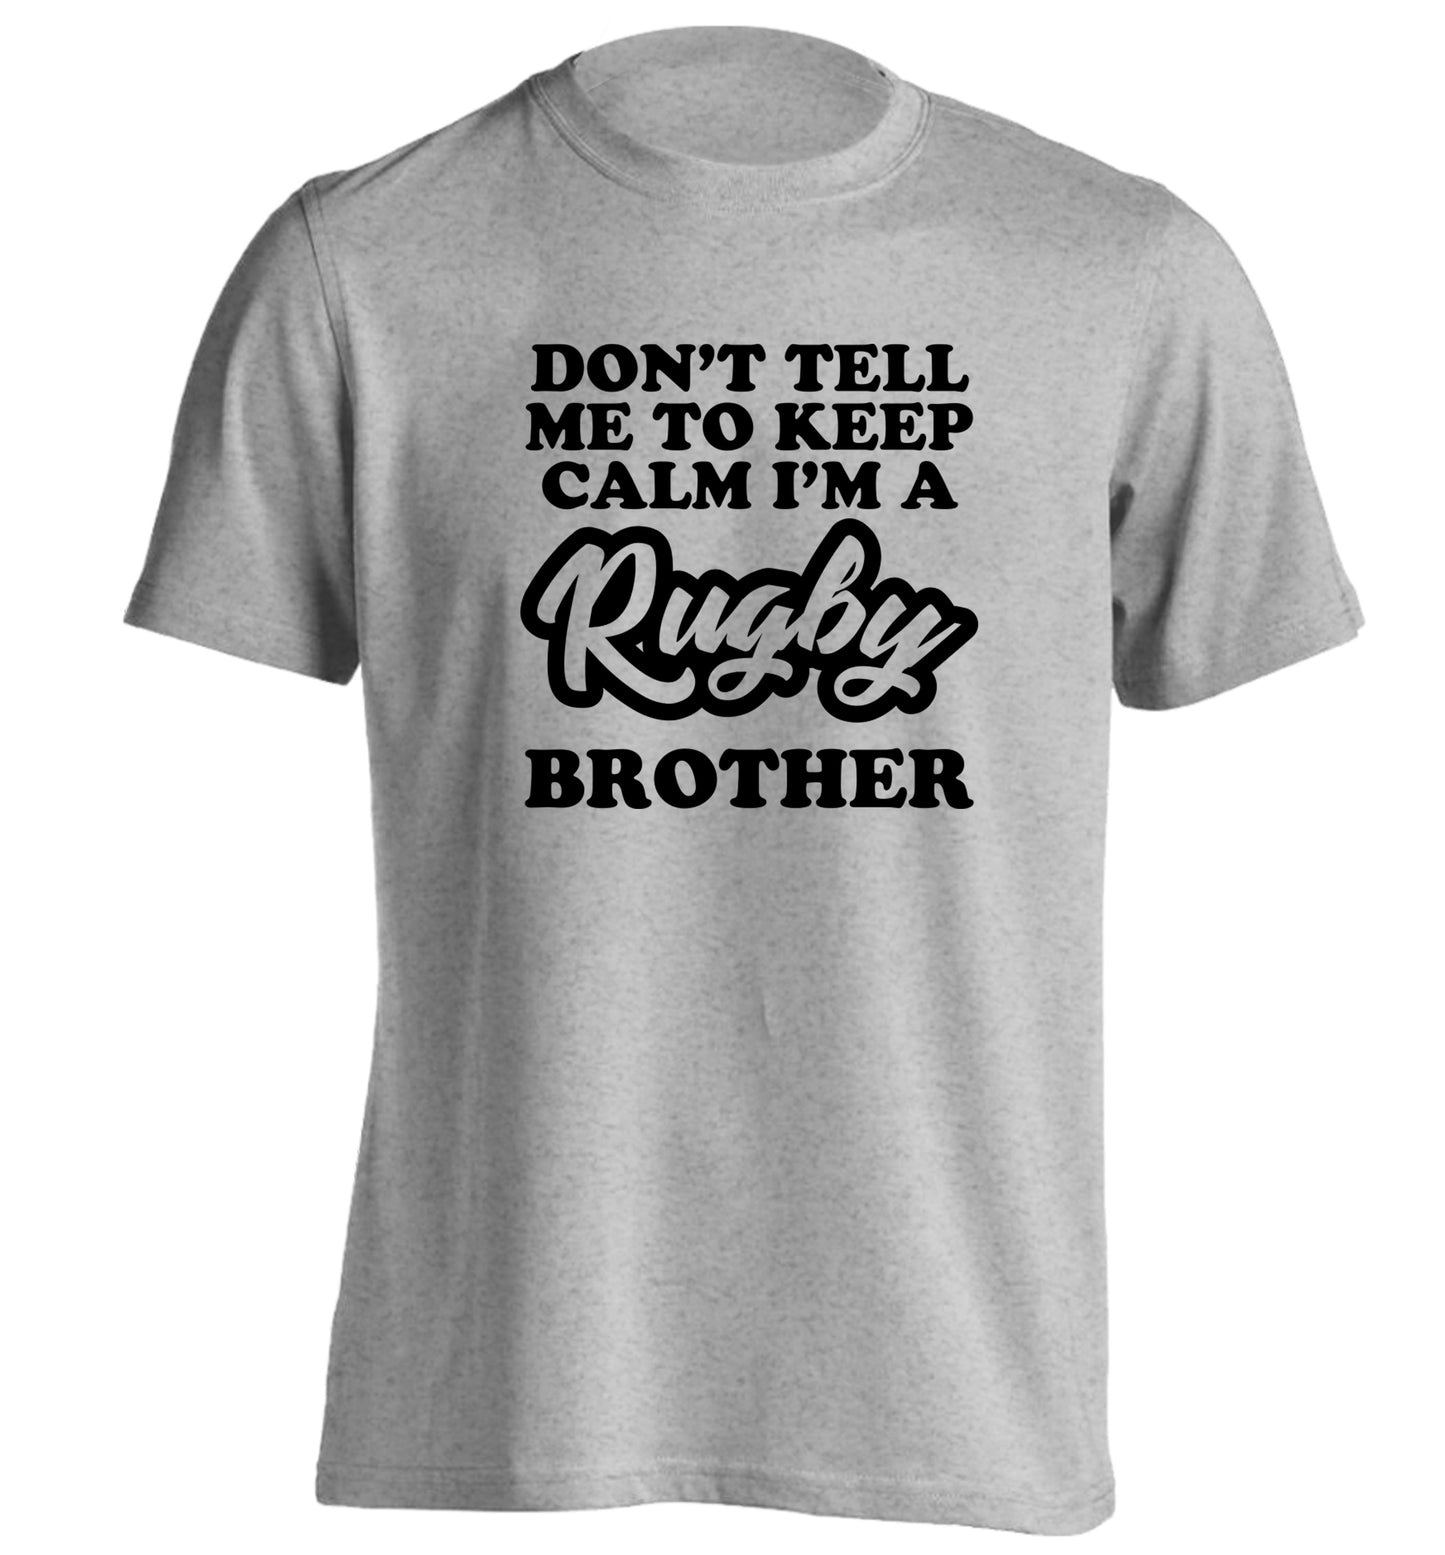 Don't tell me keep calm I'm a rugby brother adults unisex grey Tshirt 2XL